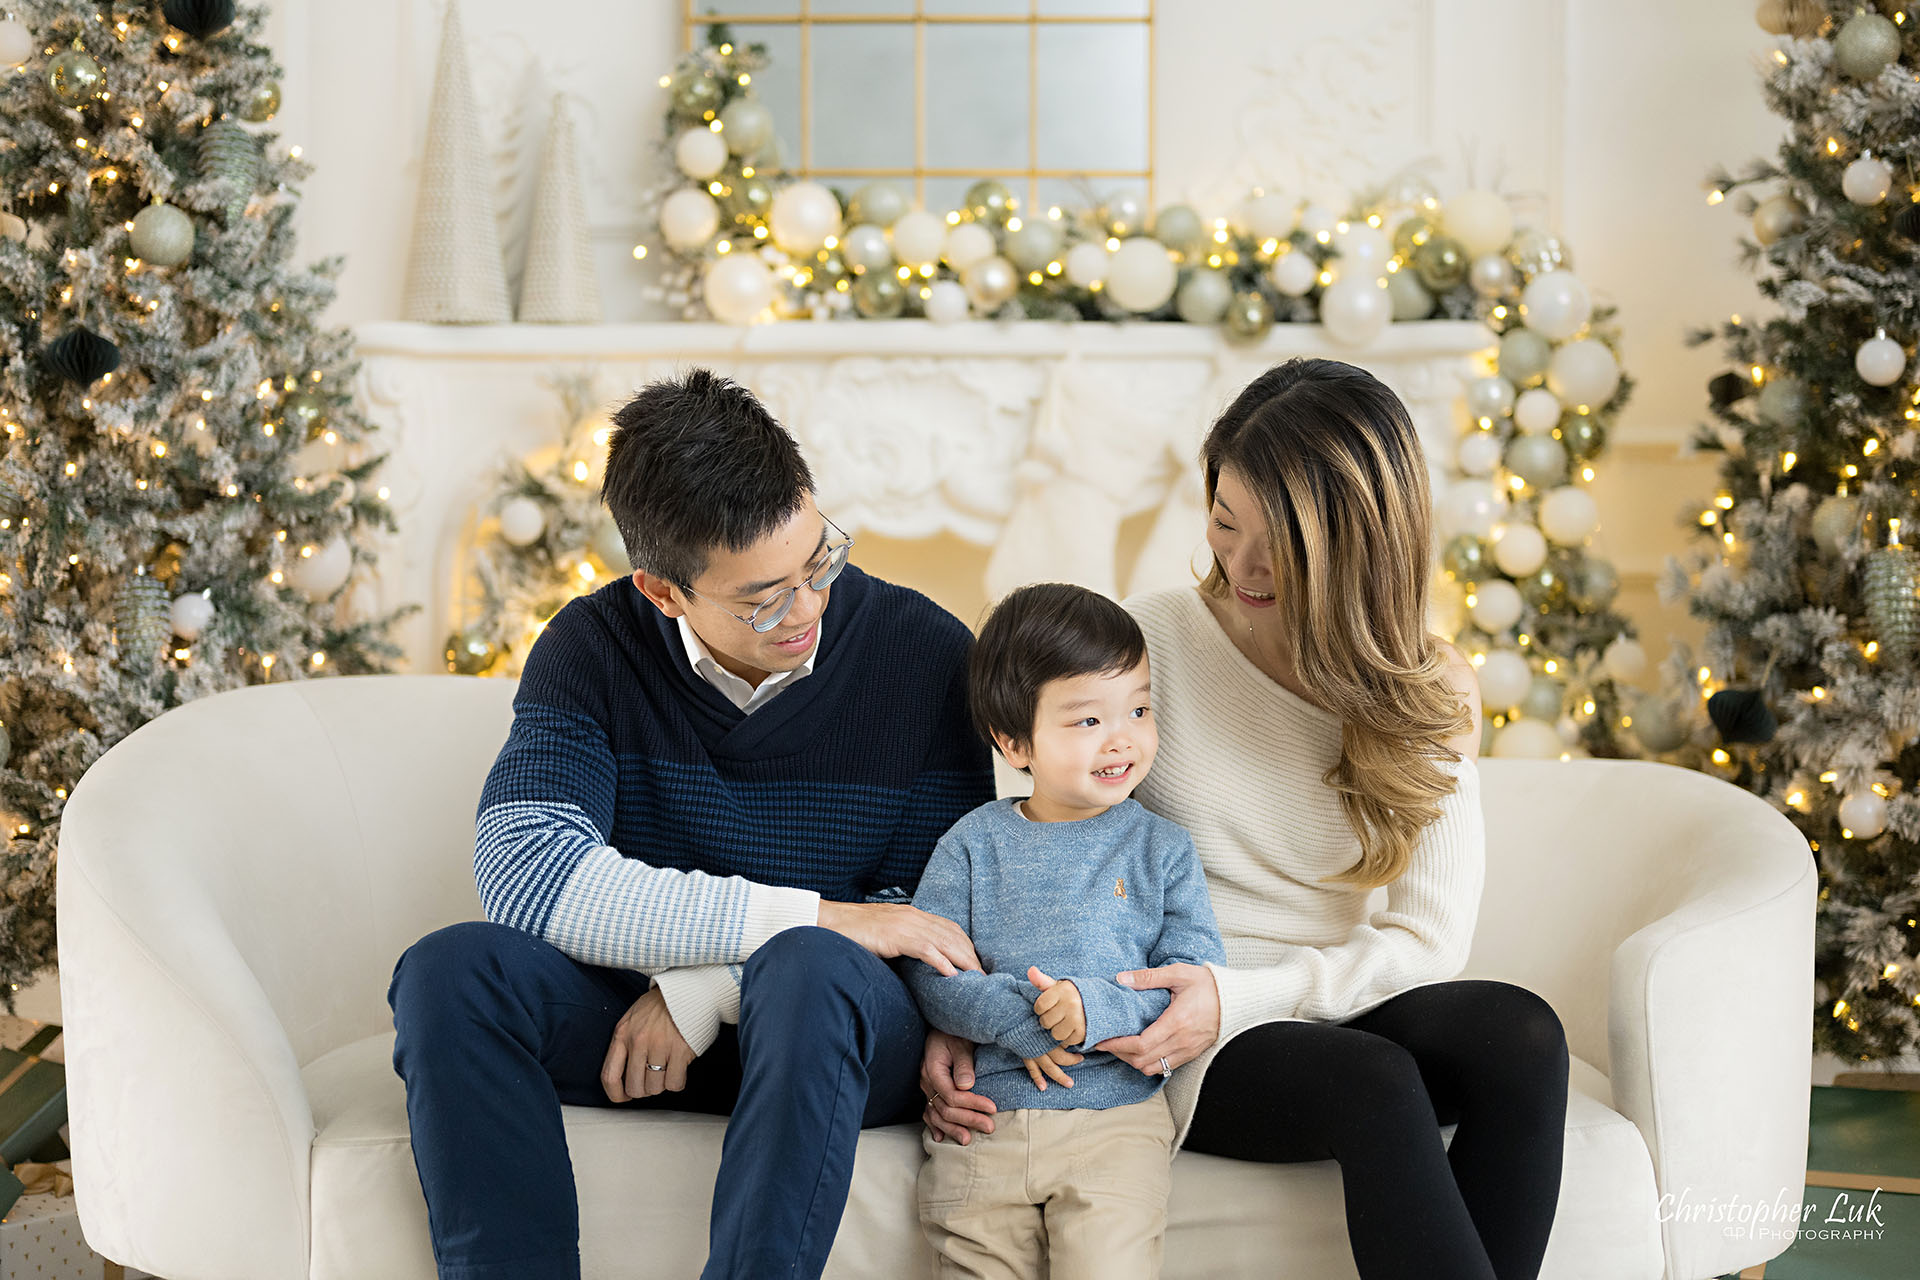 Christmas Family Photos Toronto Markham Holiday Festive Studio Pictures Photographer Natural Candid Photojournalistic Organic Mother Father Child Smile